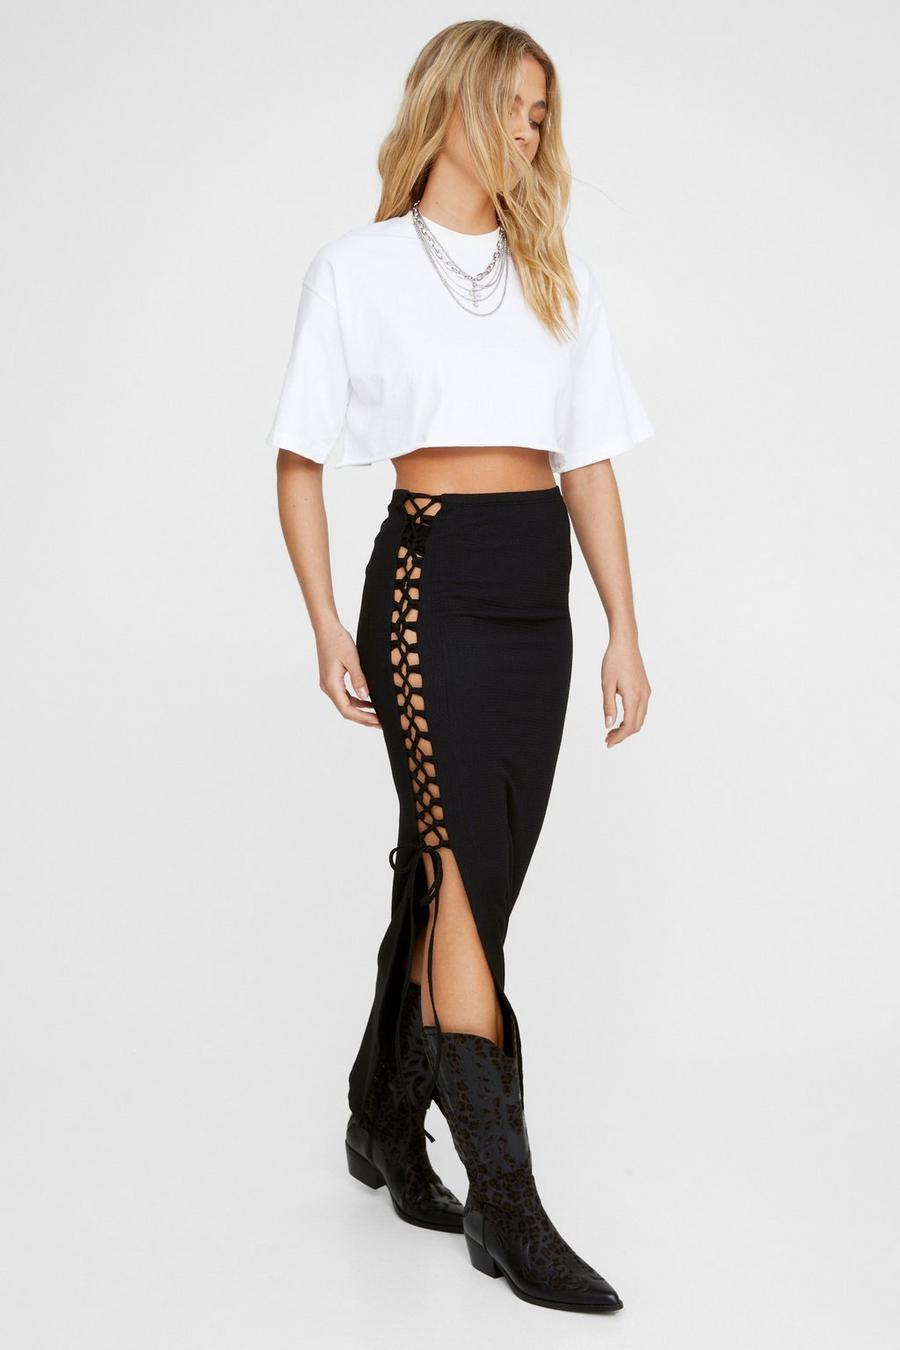 Textured Lace Up Maxi Skirt